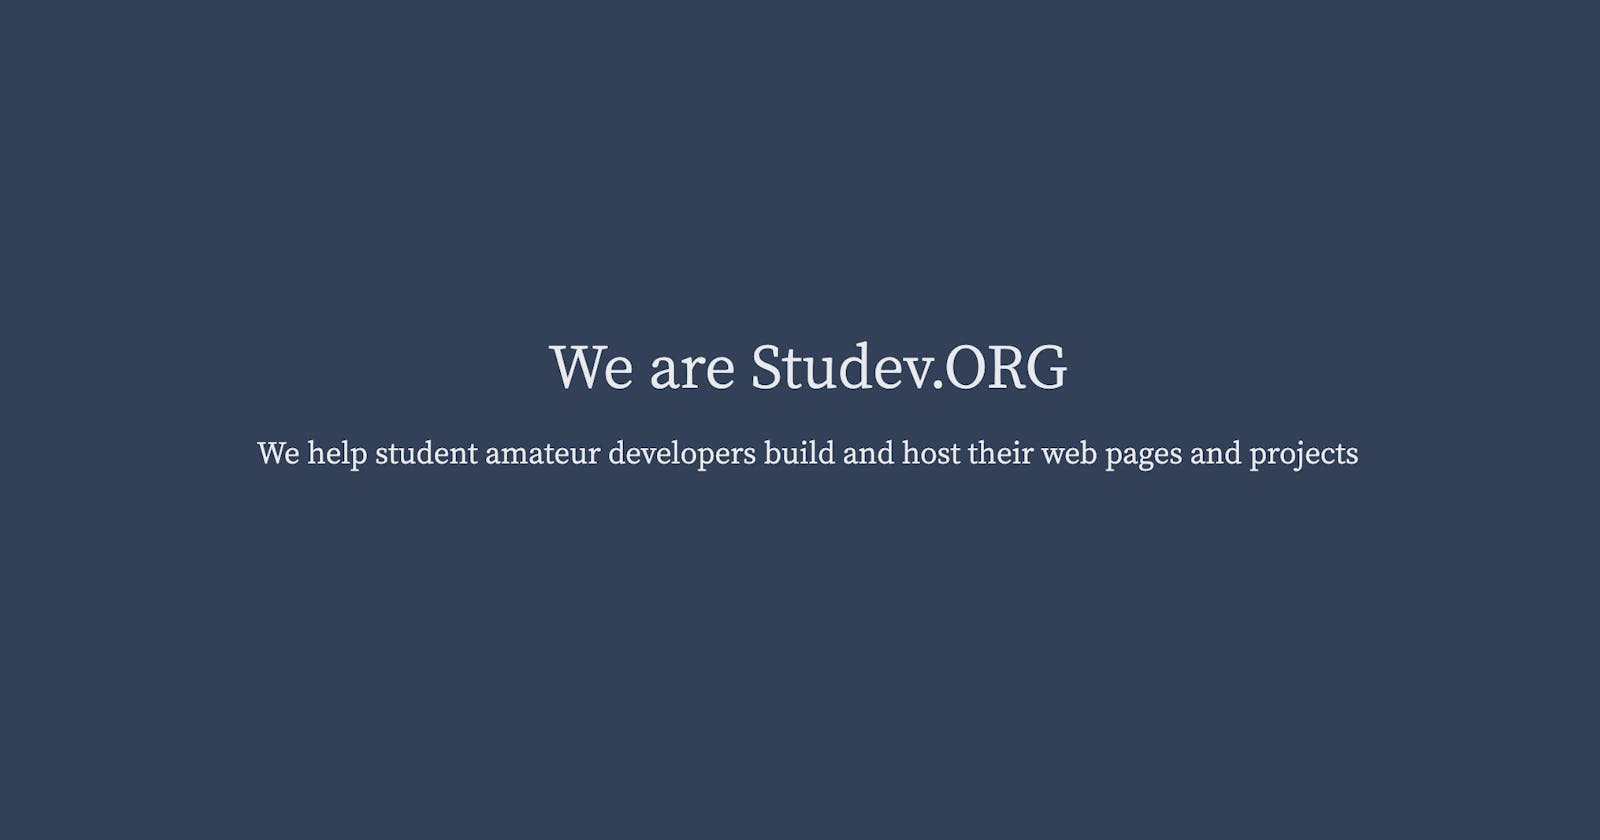 Studev.ORG: Help student amateur developers build and host their web pages and projects